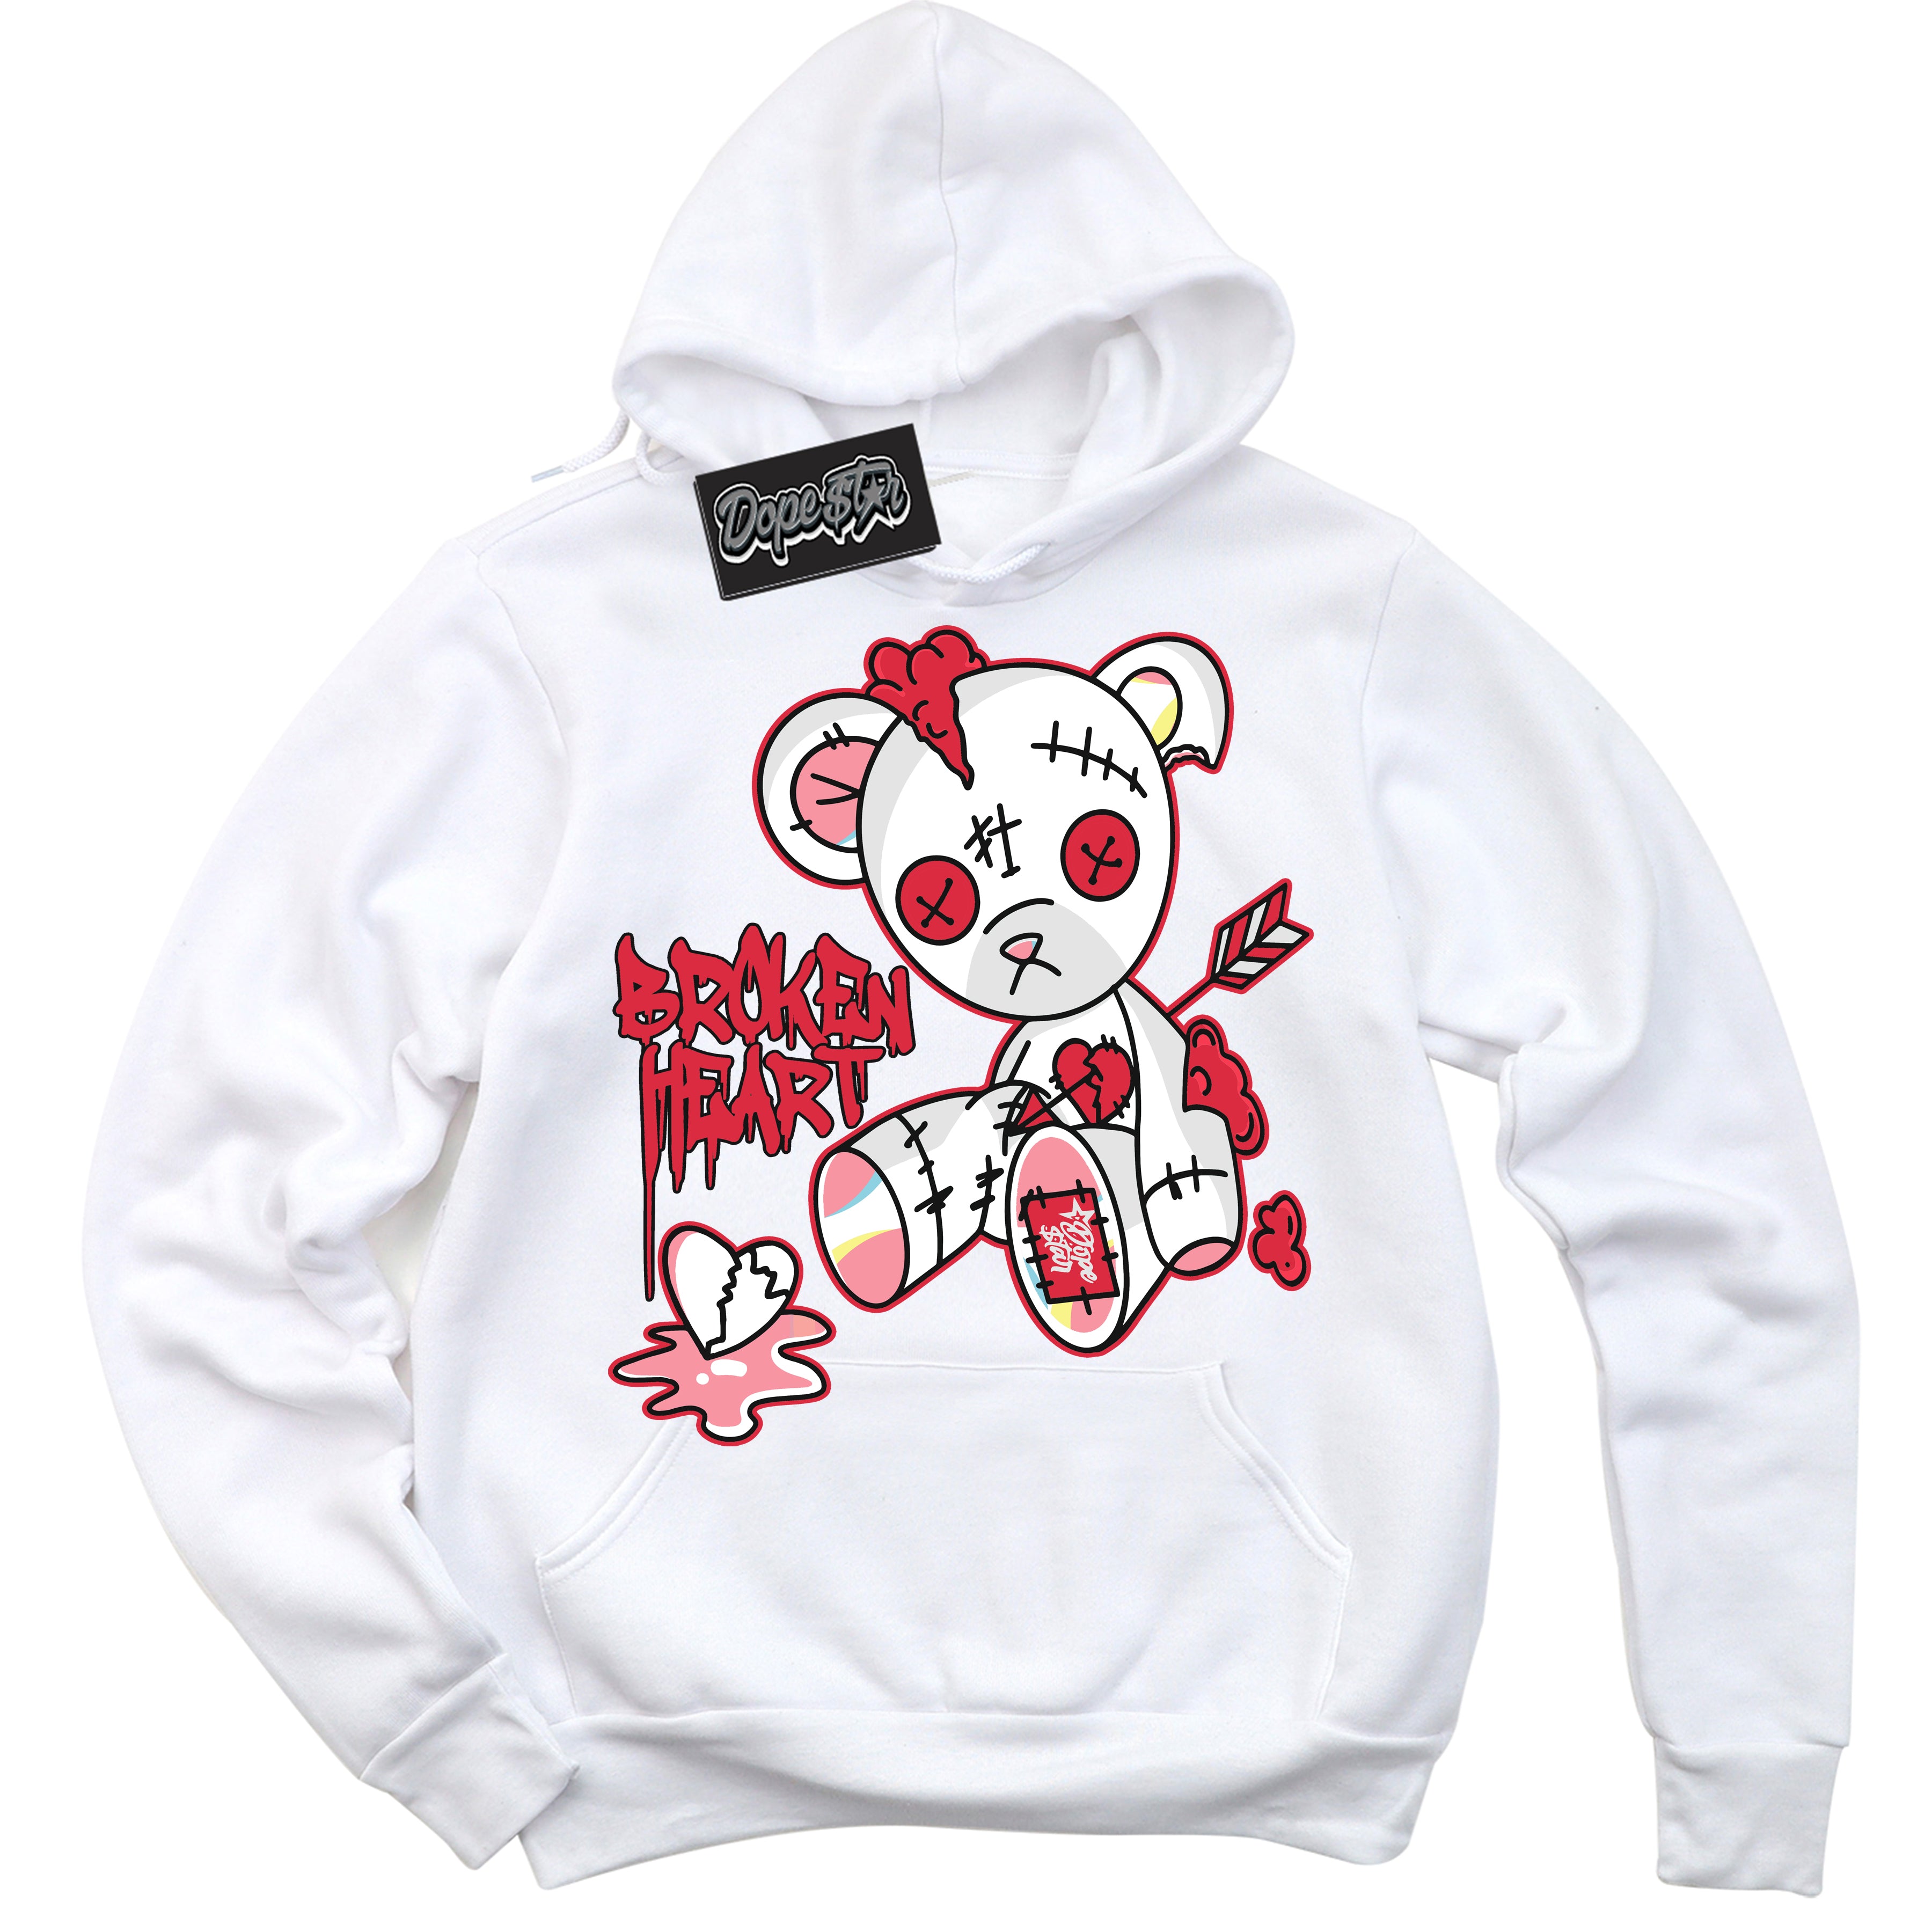 Cool White Graphic DopeStar Hoodie with “ Broken Heart Bear “ print, that perfectly matches Spider-Verse 1s sneakers